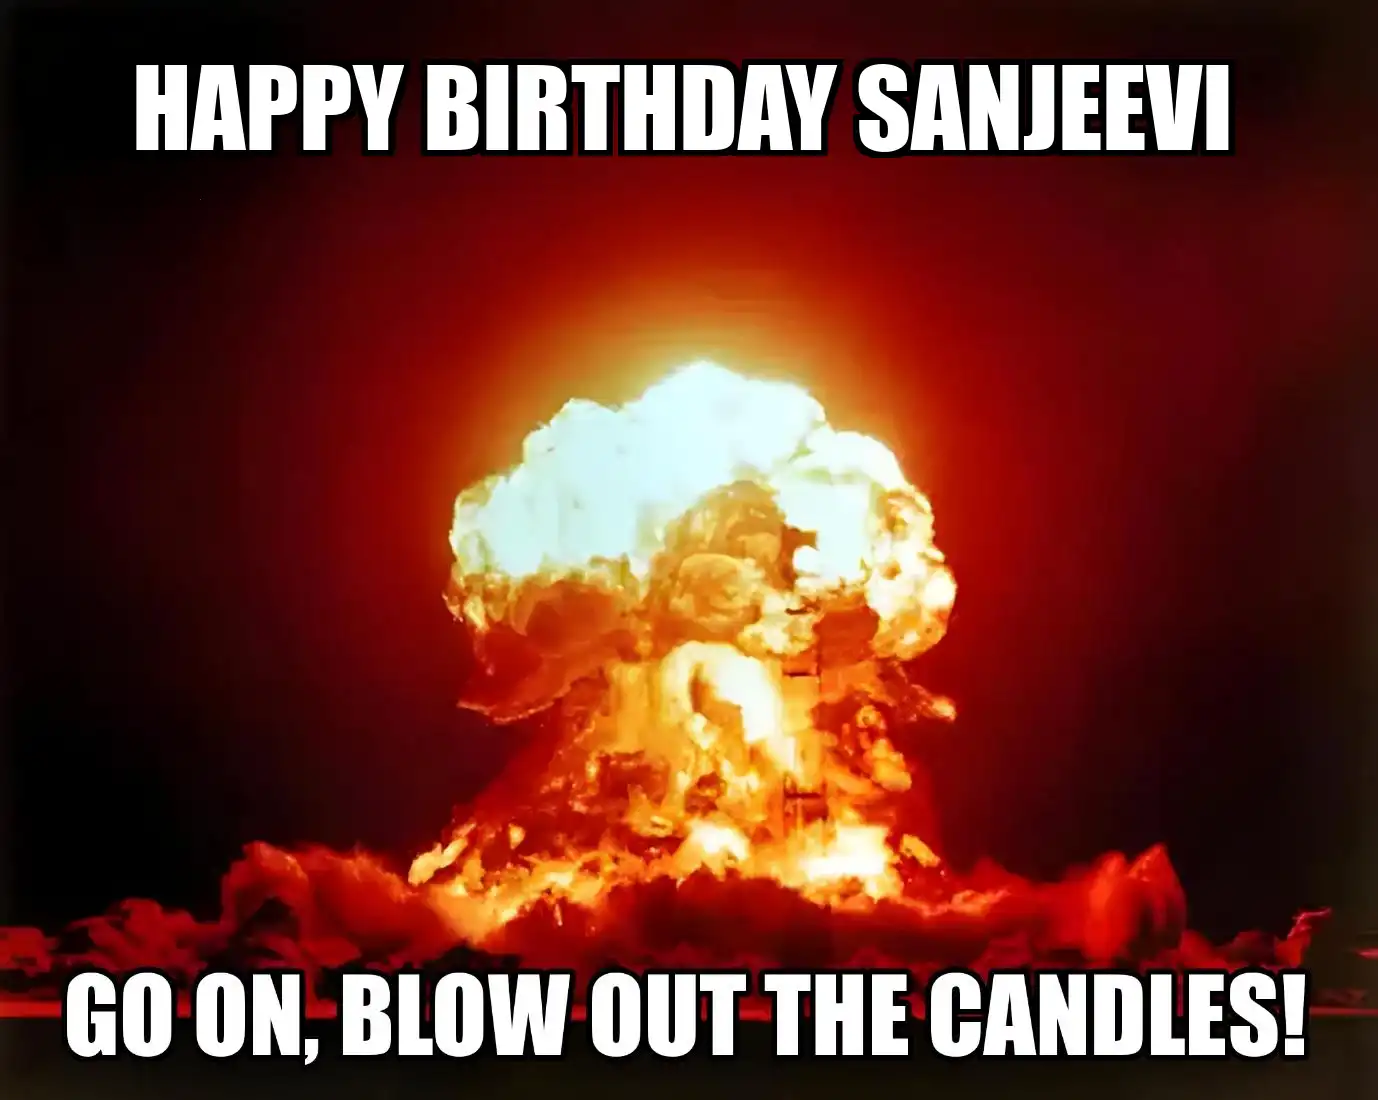 Happy Birthday Sanjeevi Go On Blow Out The Candles Meme